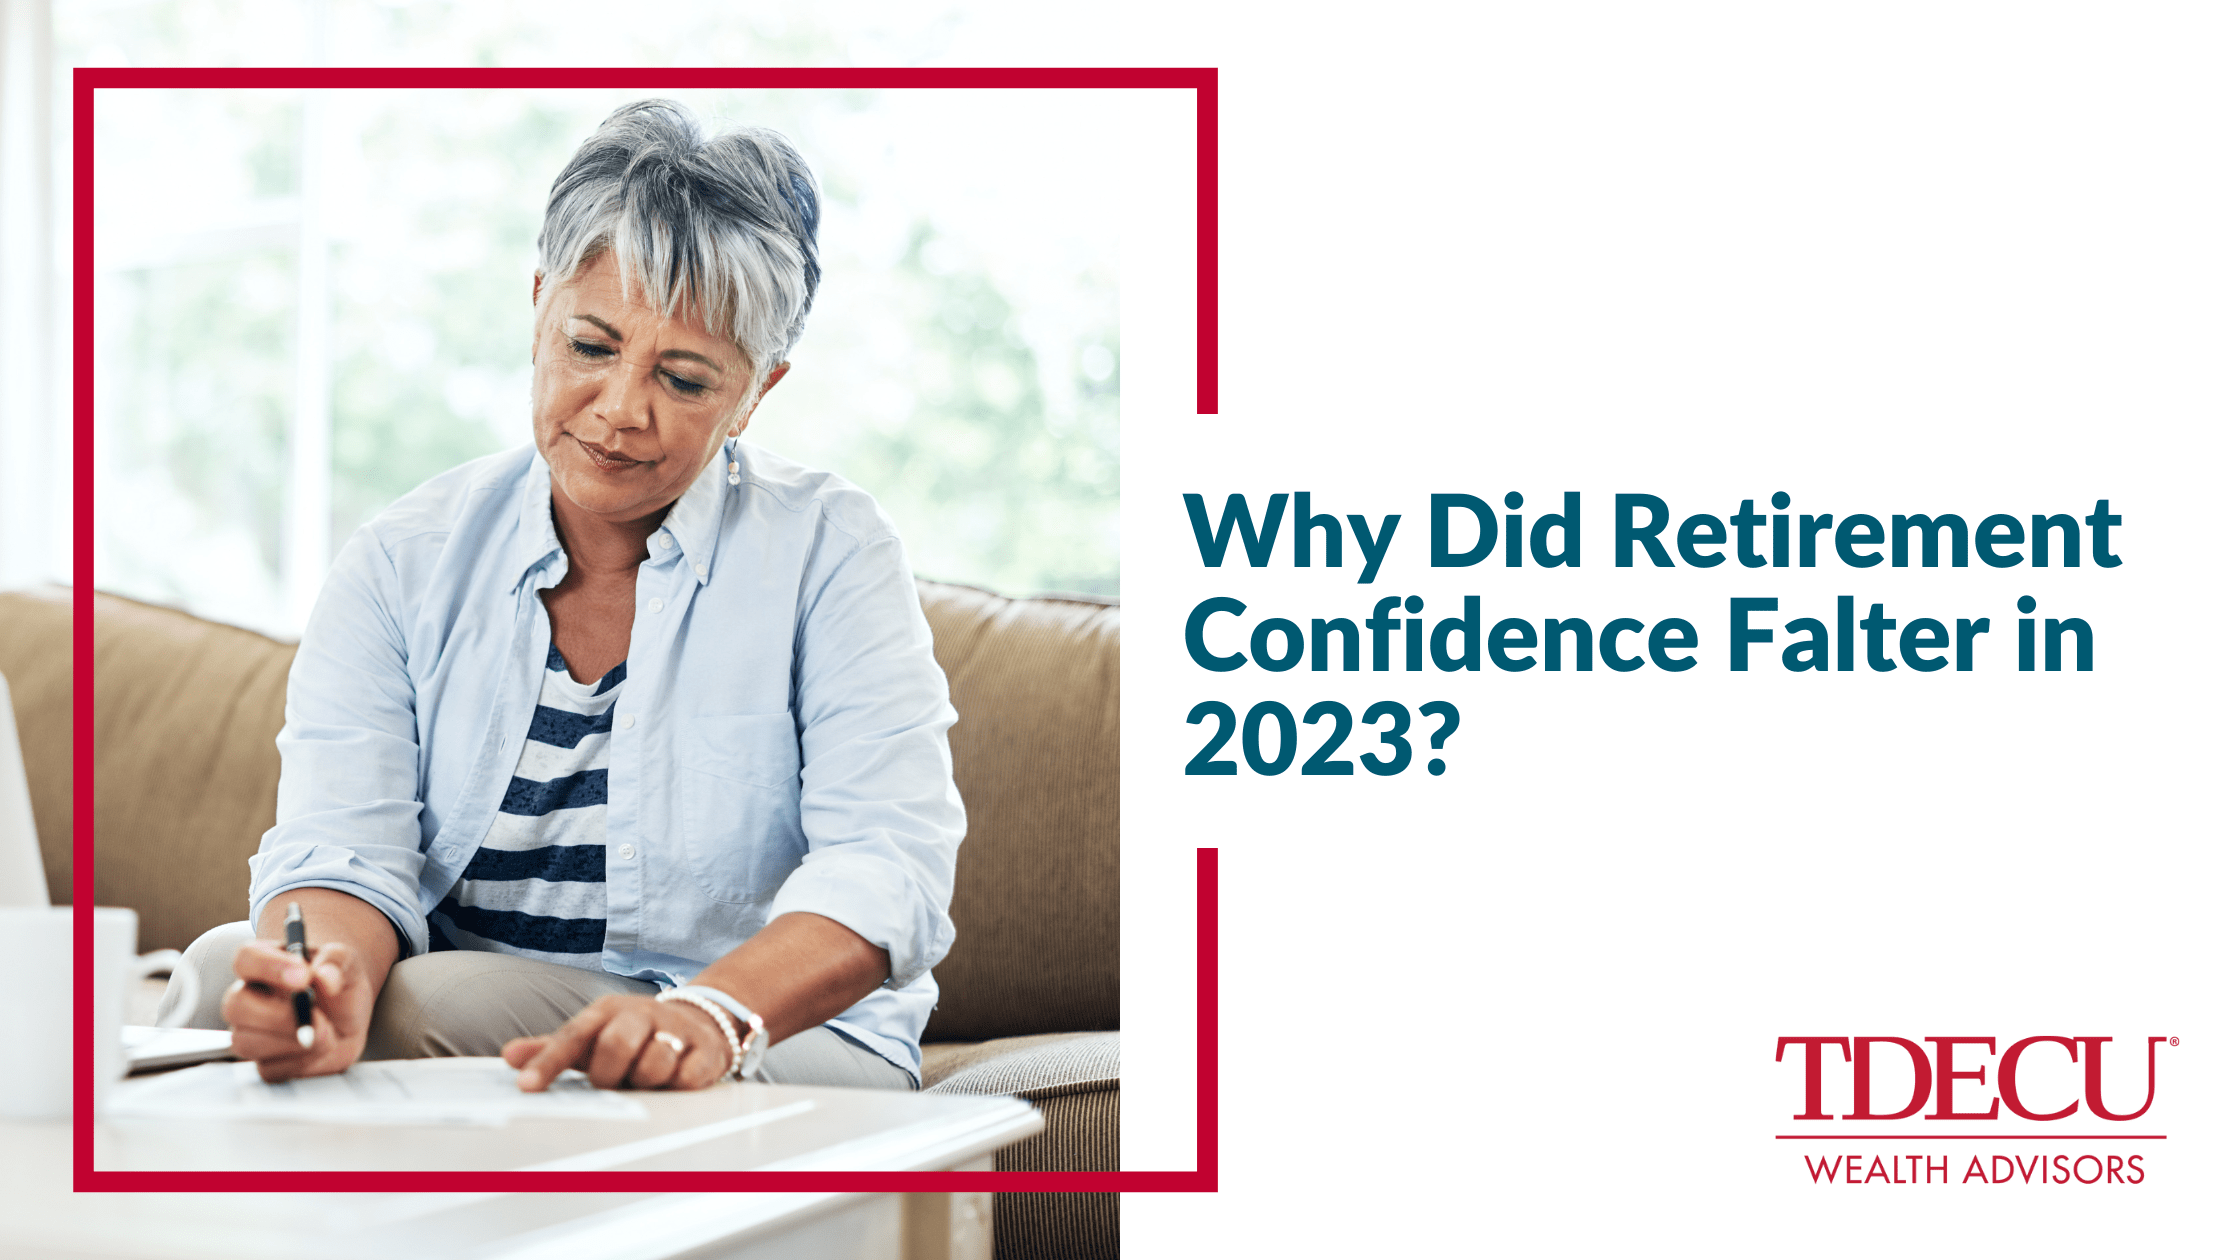 Why Did Retirement Confidence Falter in 2023?